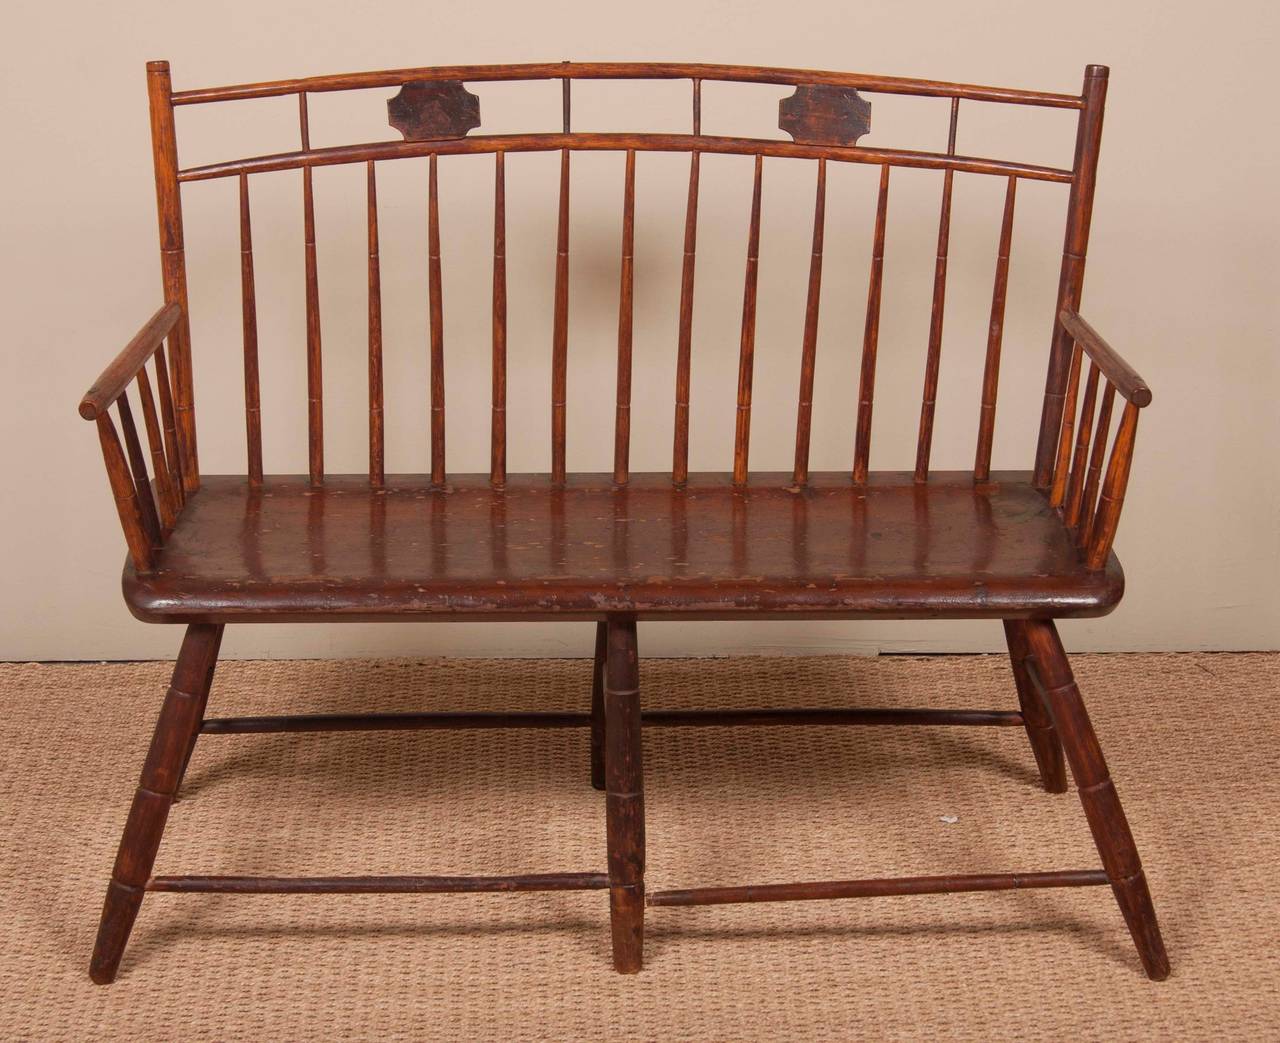 A 19th Century Windsor wooden (probably ash or hickory) settee of birdcage design from Pennsylvania.